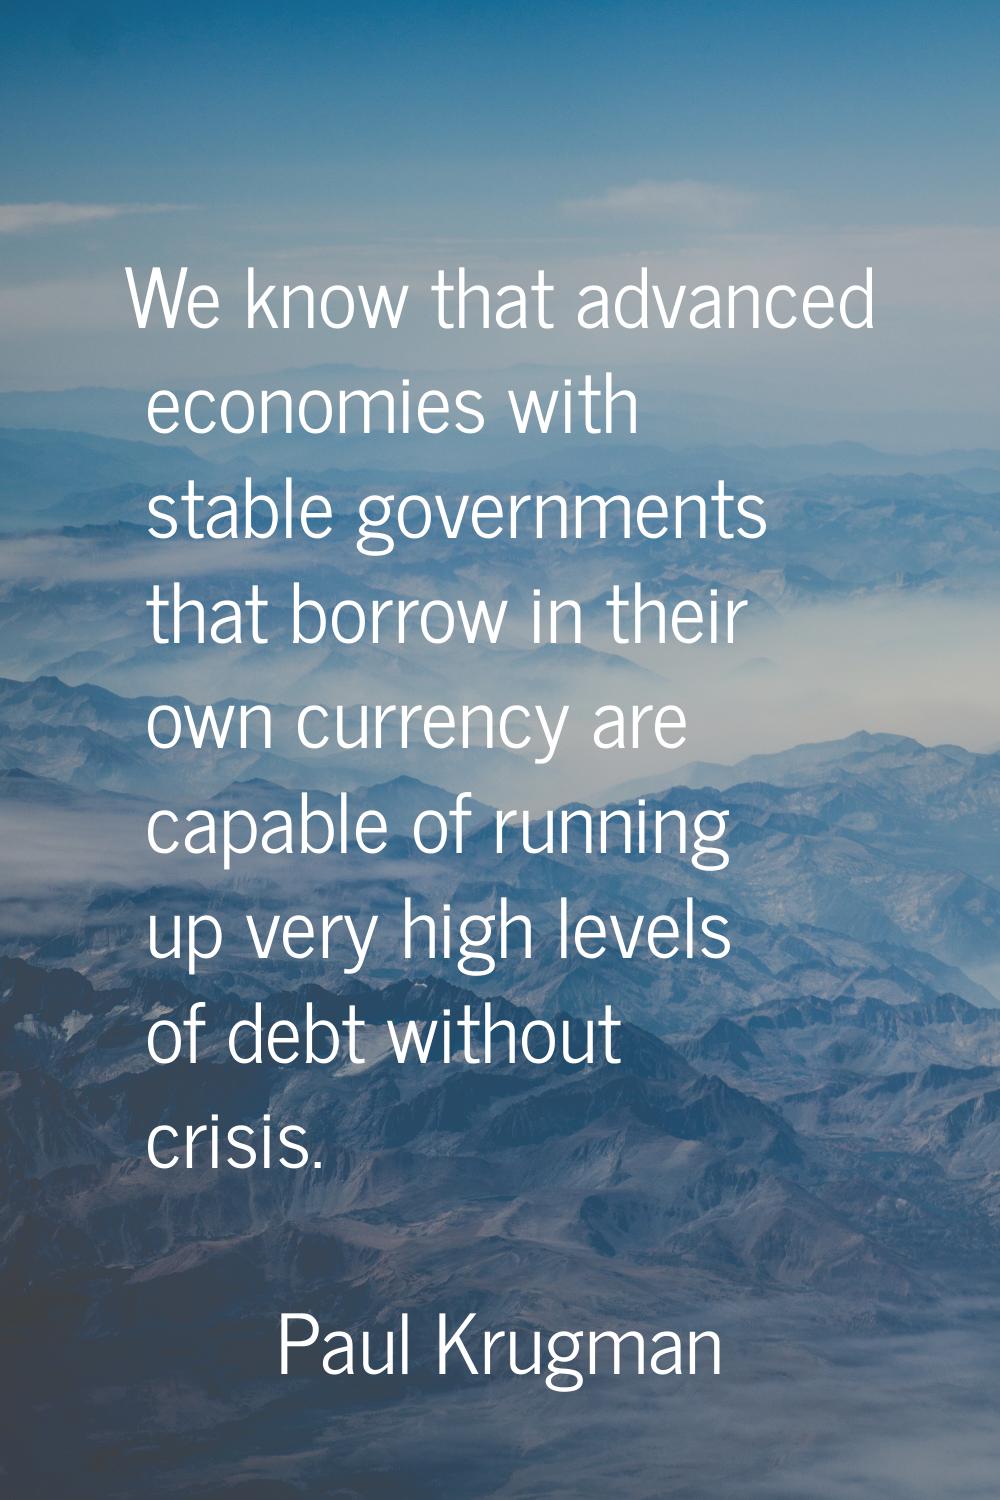 We know that advanced economies with stable governments that borrow in their own currency are capab